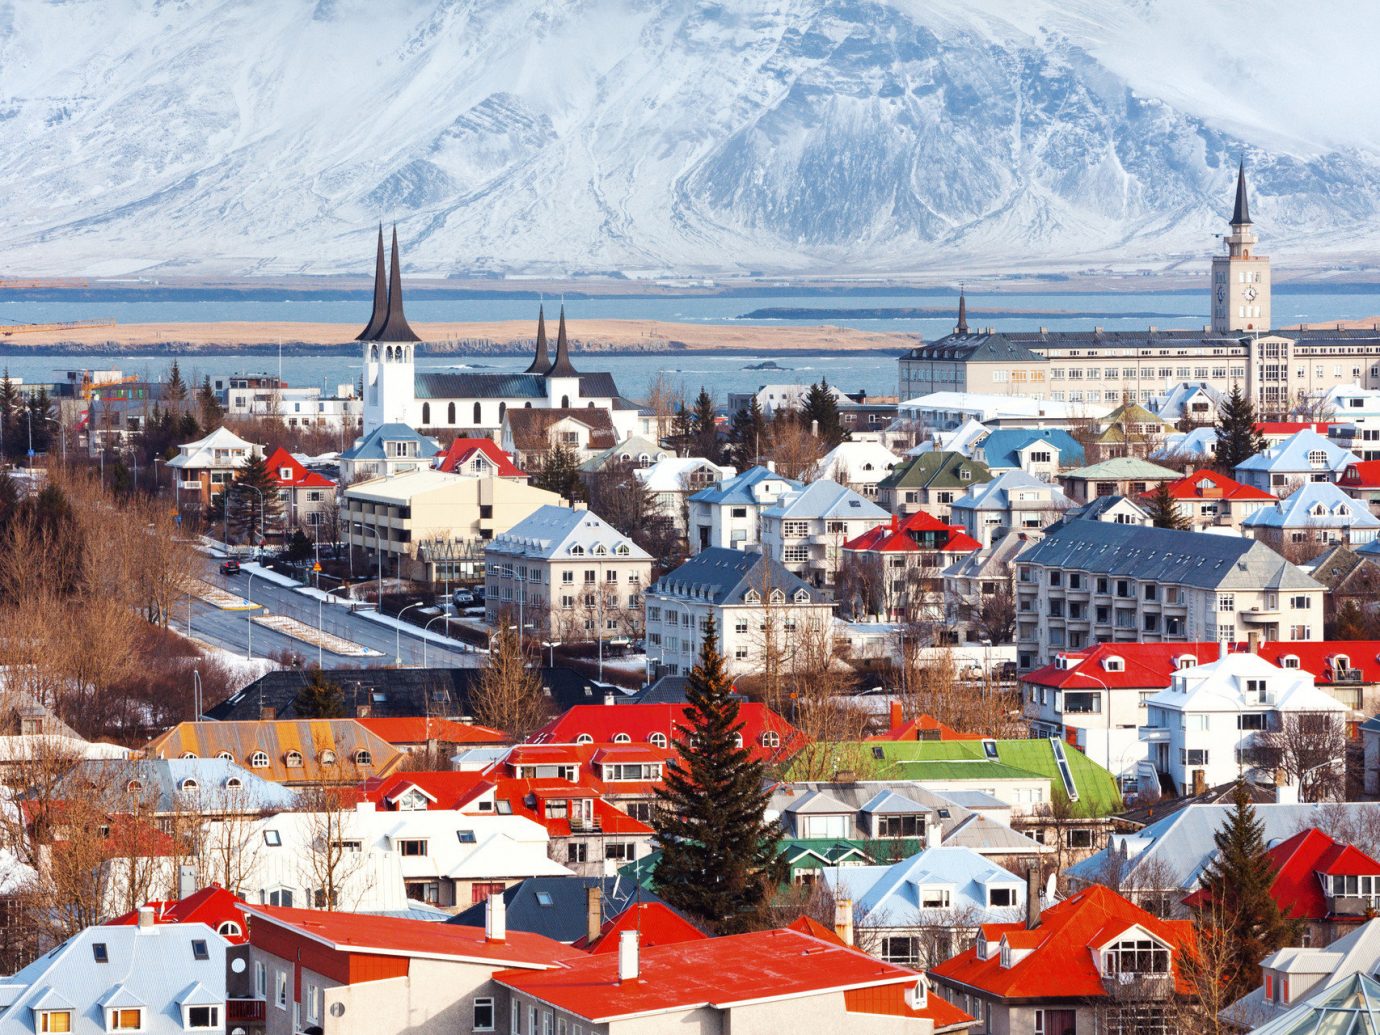 Boutique Hotels Health + Wellness Hotels Iceland Meditation Retreats Offbeat Outdoors + Adventure Reykjavík Road Trips Romance Travel Tips Trip Ideas Yoga Retreats outdoor snow Town City mountain human settlement Winter cityscape Harbor aerial photography panorama